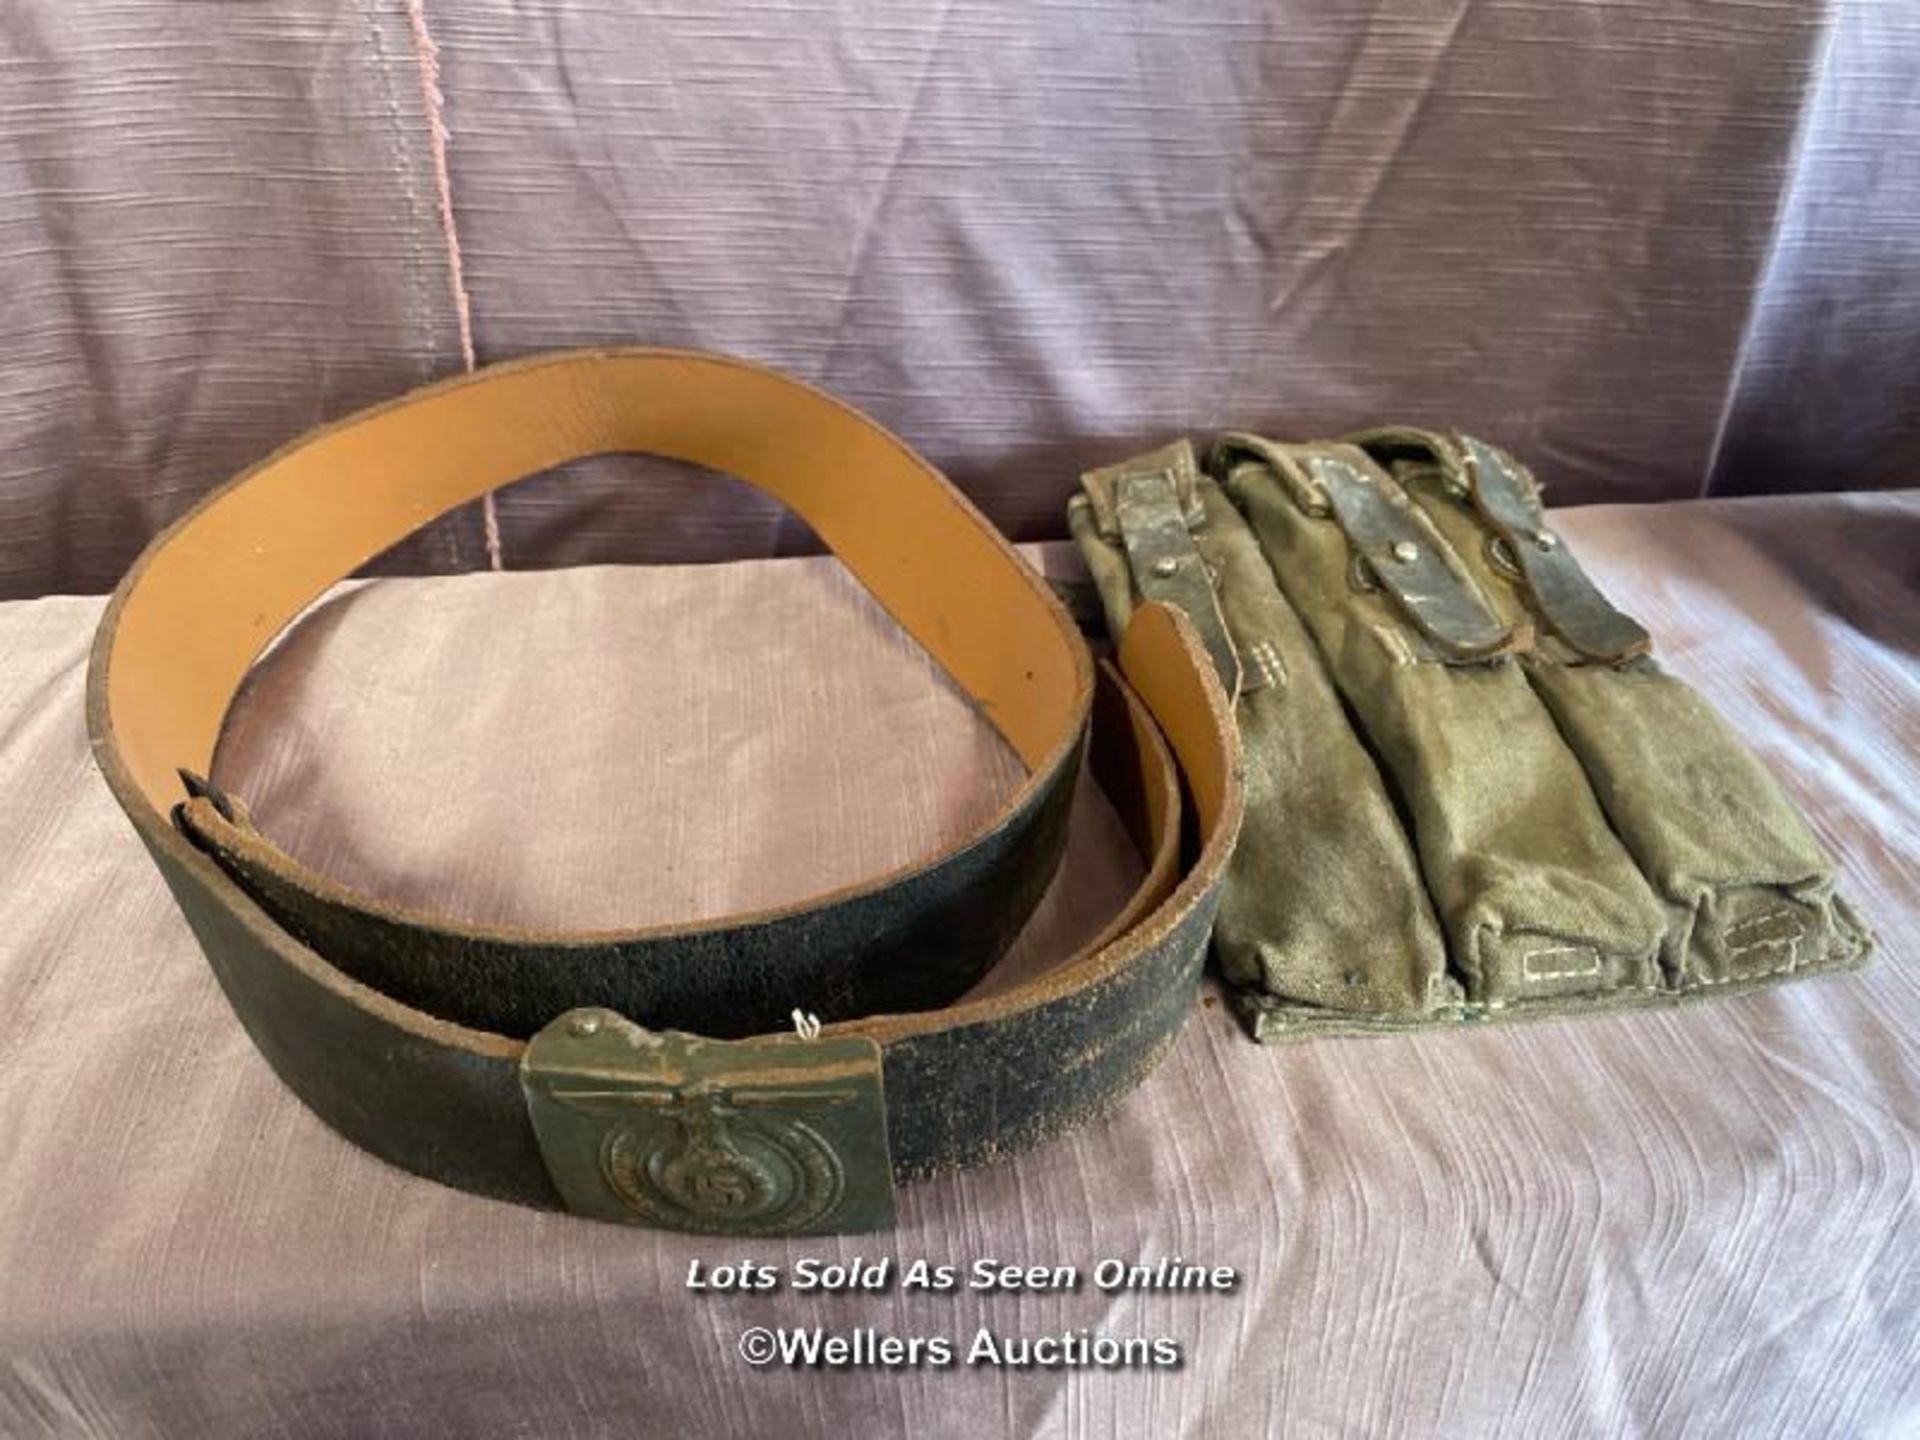 WW2 PATTERN GERMAN LEATHER BELT WITH CLASP AND MP40 MAGAZINE POUCH (RE-ENACTMENT)